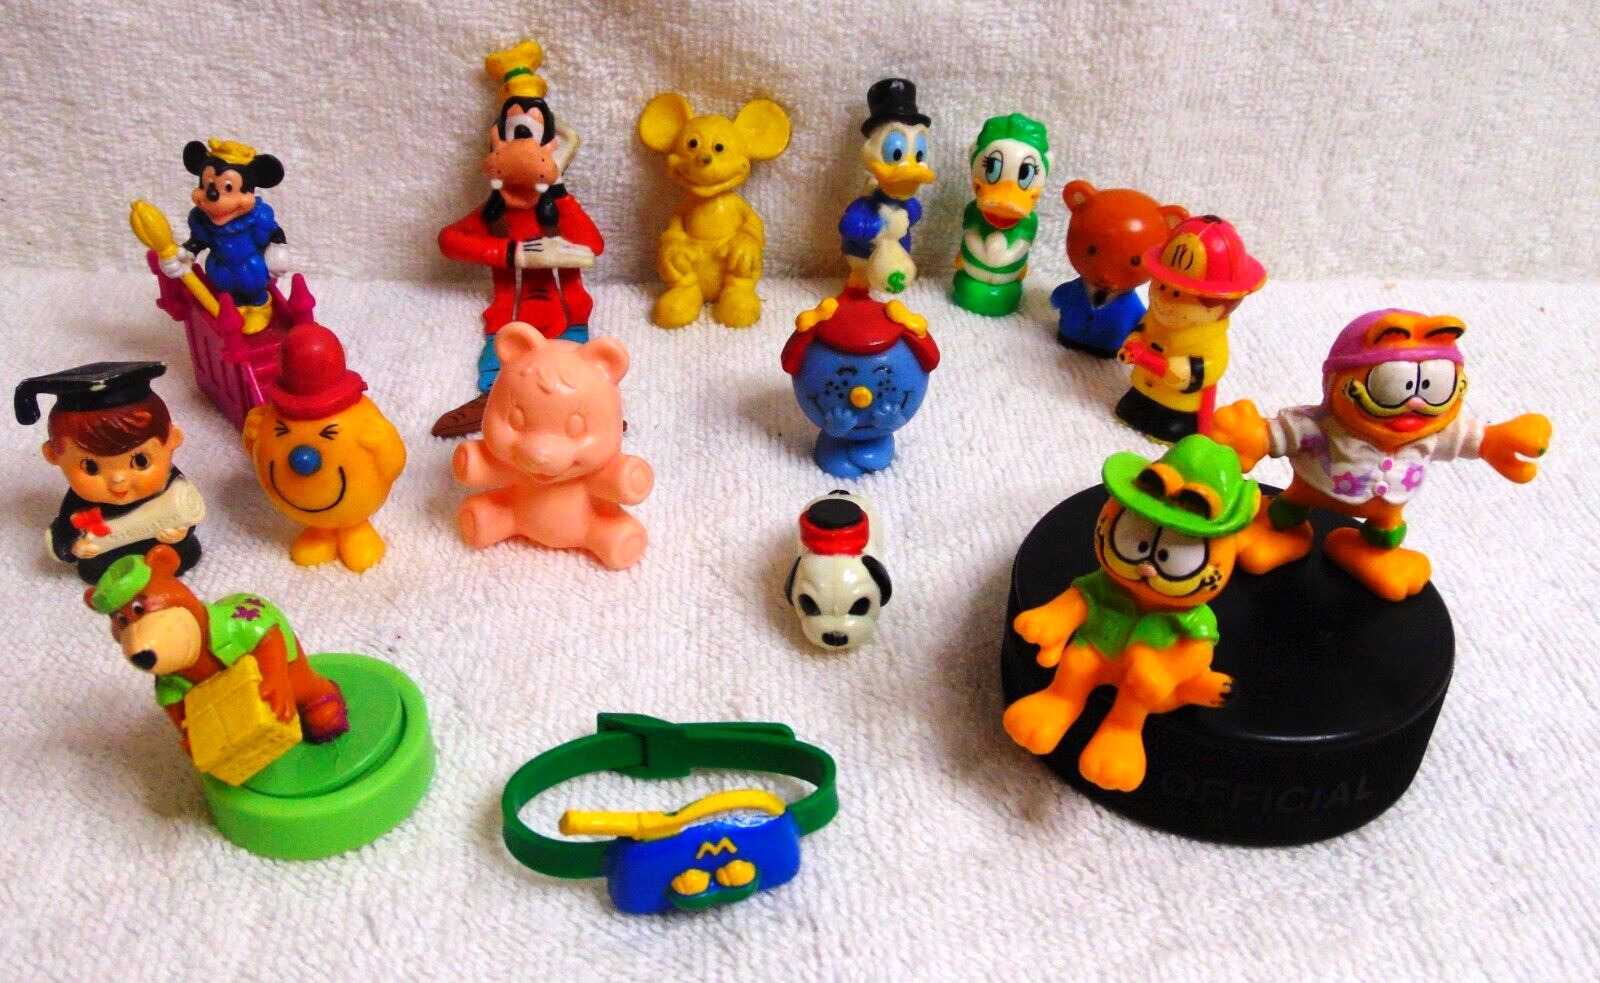 Mickey Mouse Disney Character Garfield Vintage Toys Mini Figurines Lot of 16